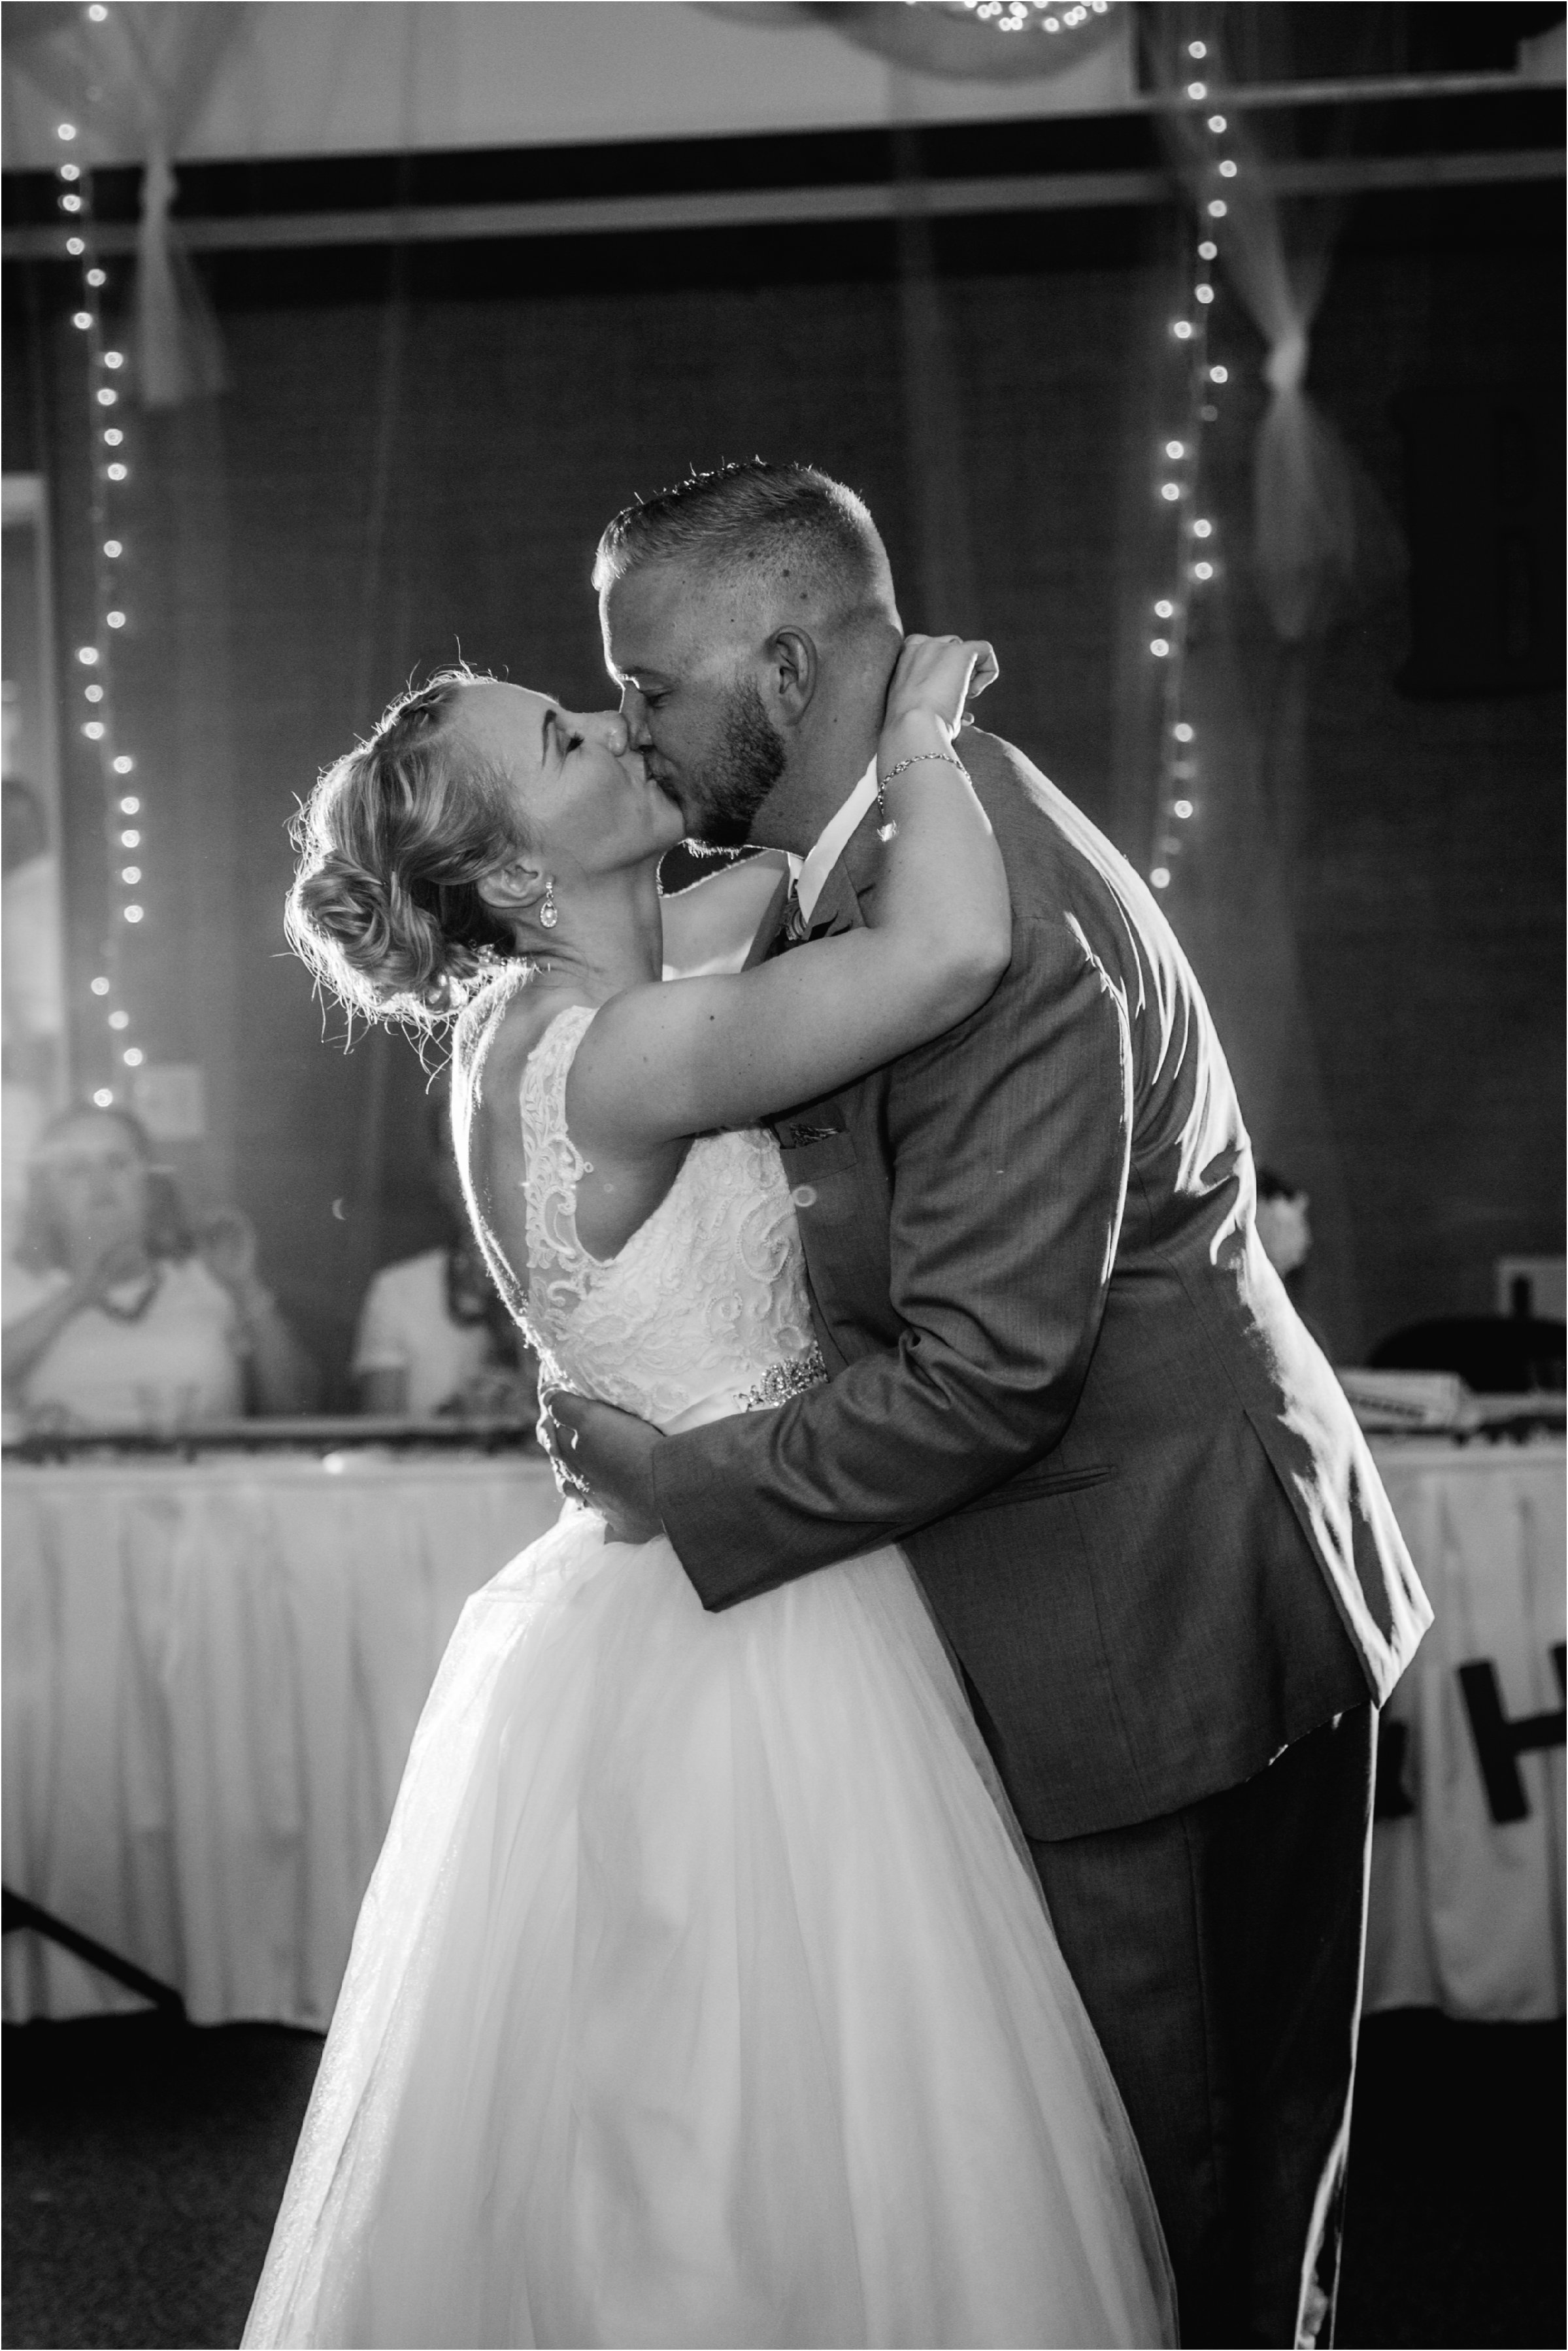 black and white photo of bride and groom kissing at the end of their first dance at their wedding reception